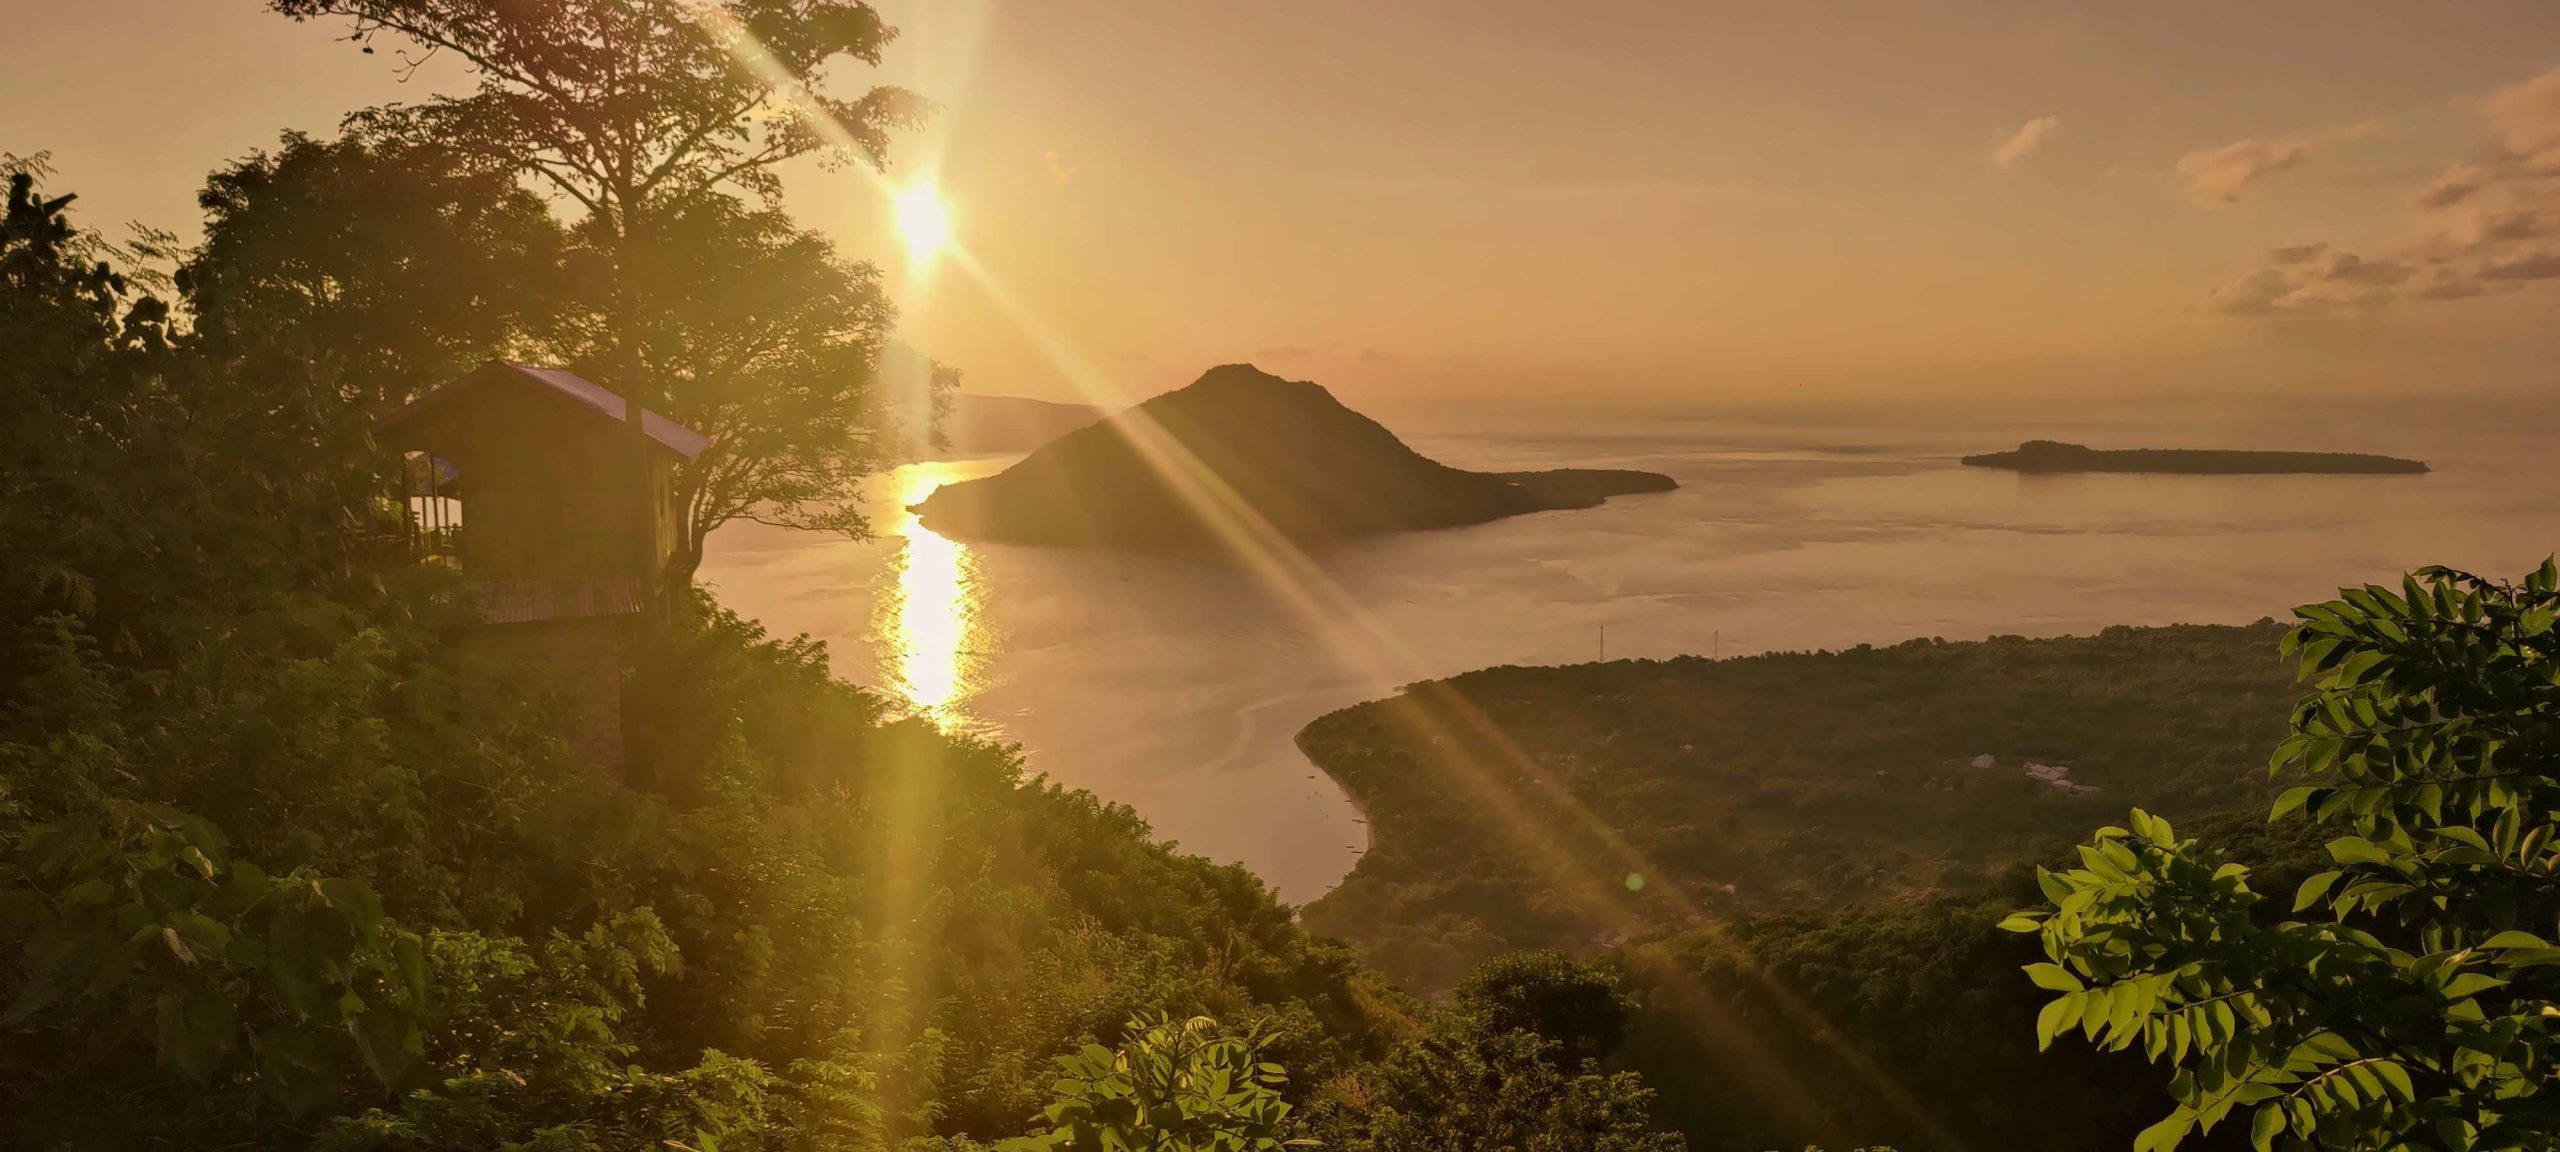 Sunset view from a high hill to the sea. There is a small cabin on the left side of the hill. There is a high island in the sea behind which the sun sets. Where to Go in Indonesia?| Tailor Made Holidays Indonesia.